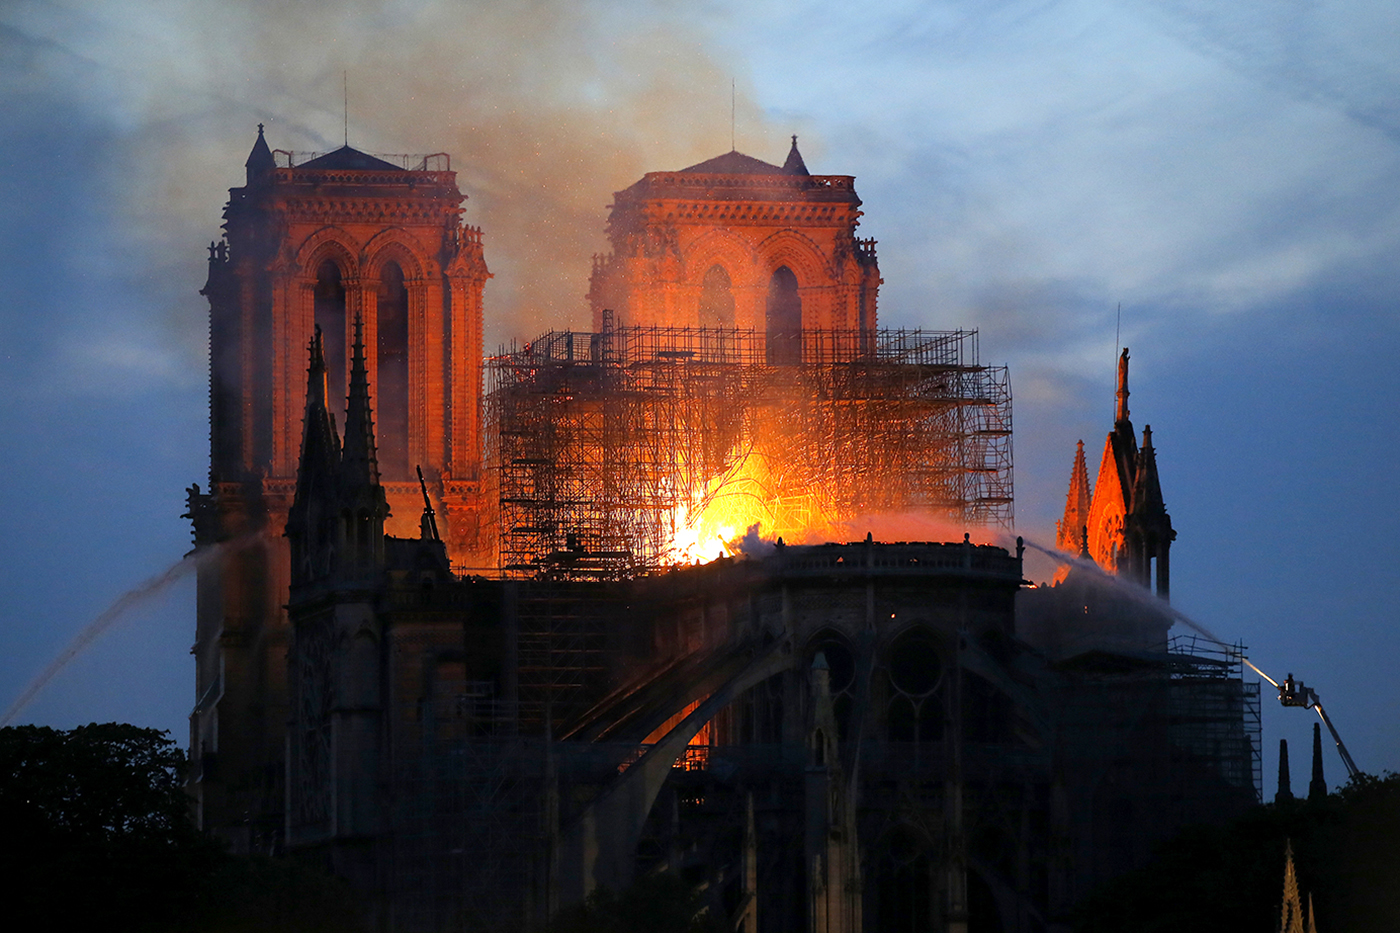 Notre Dame's gothic architectural features may be what saved it from total destruction from fire, Northeastern University professors say